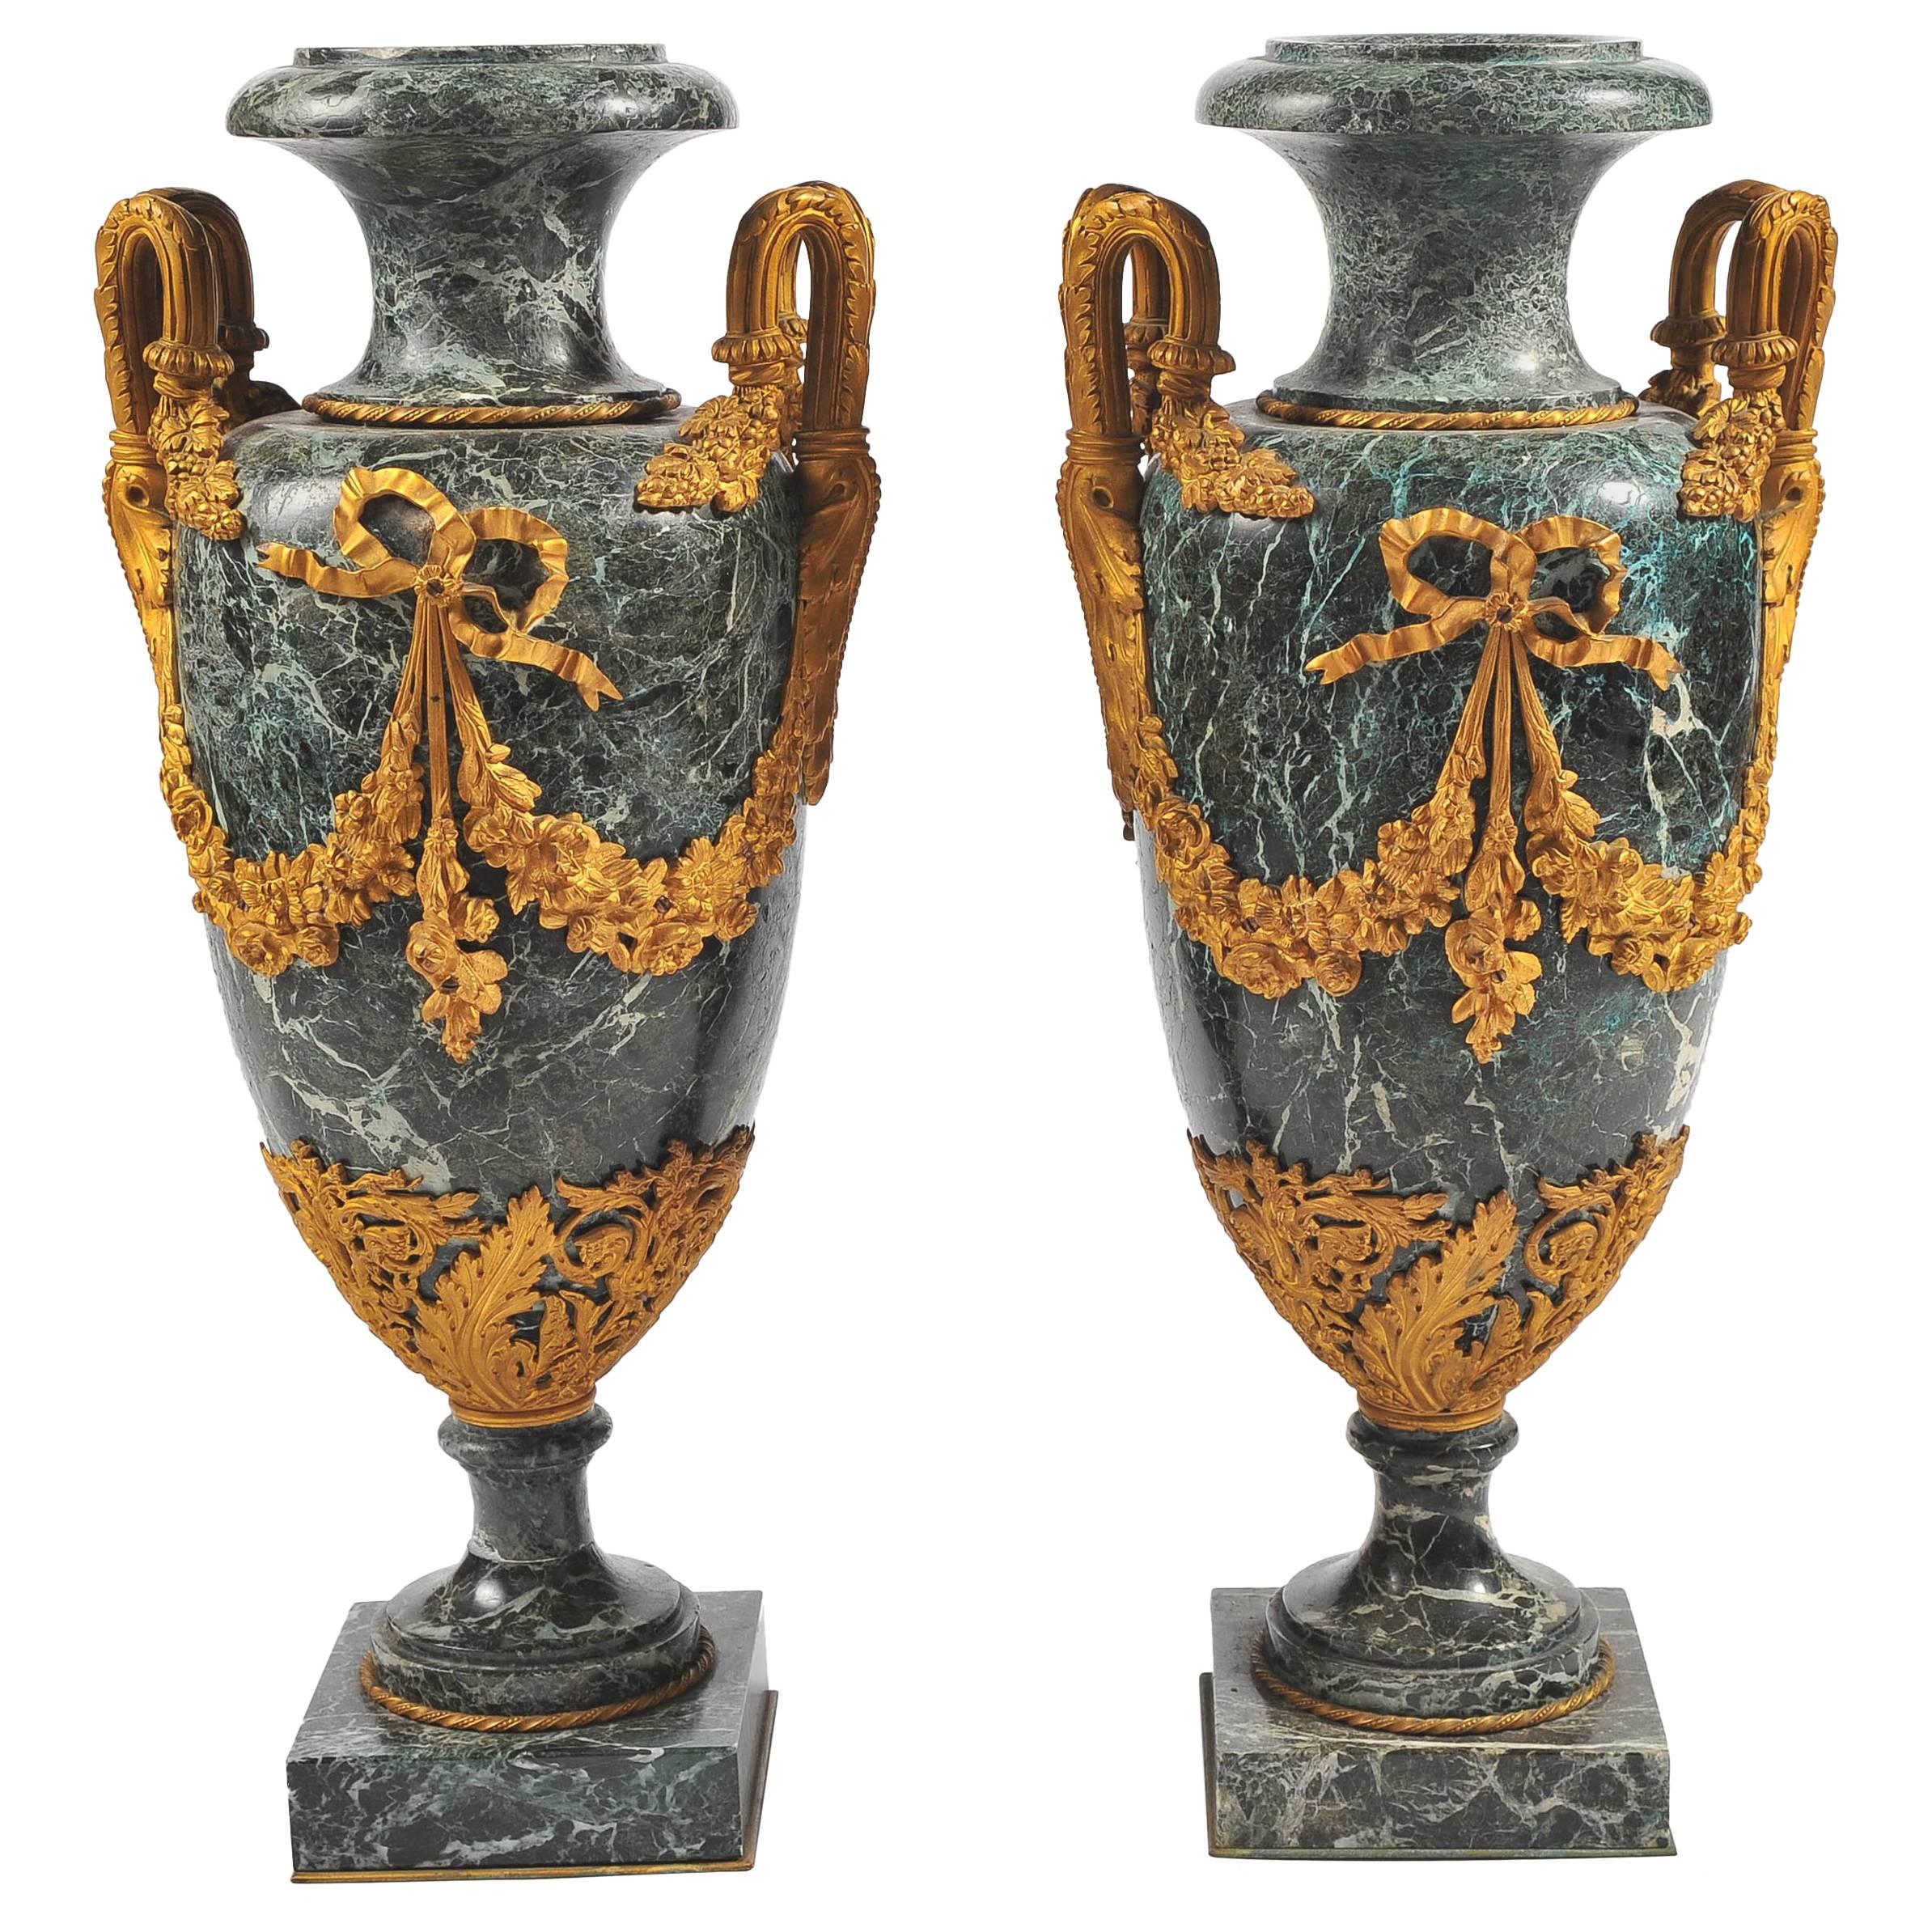 Large Pair of 19th Century Green Marble and Ormolu Urns